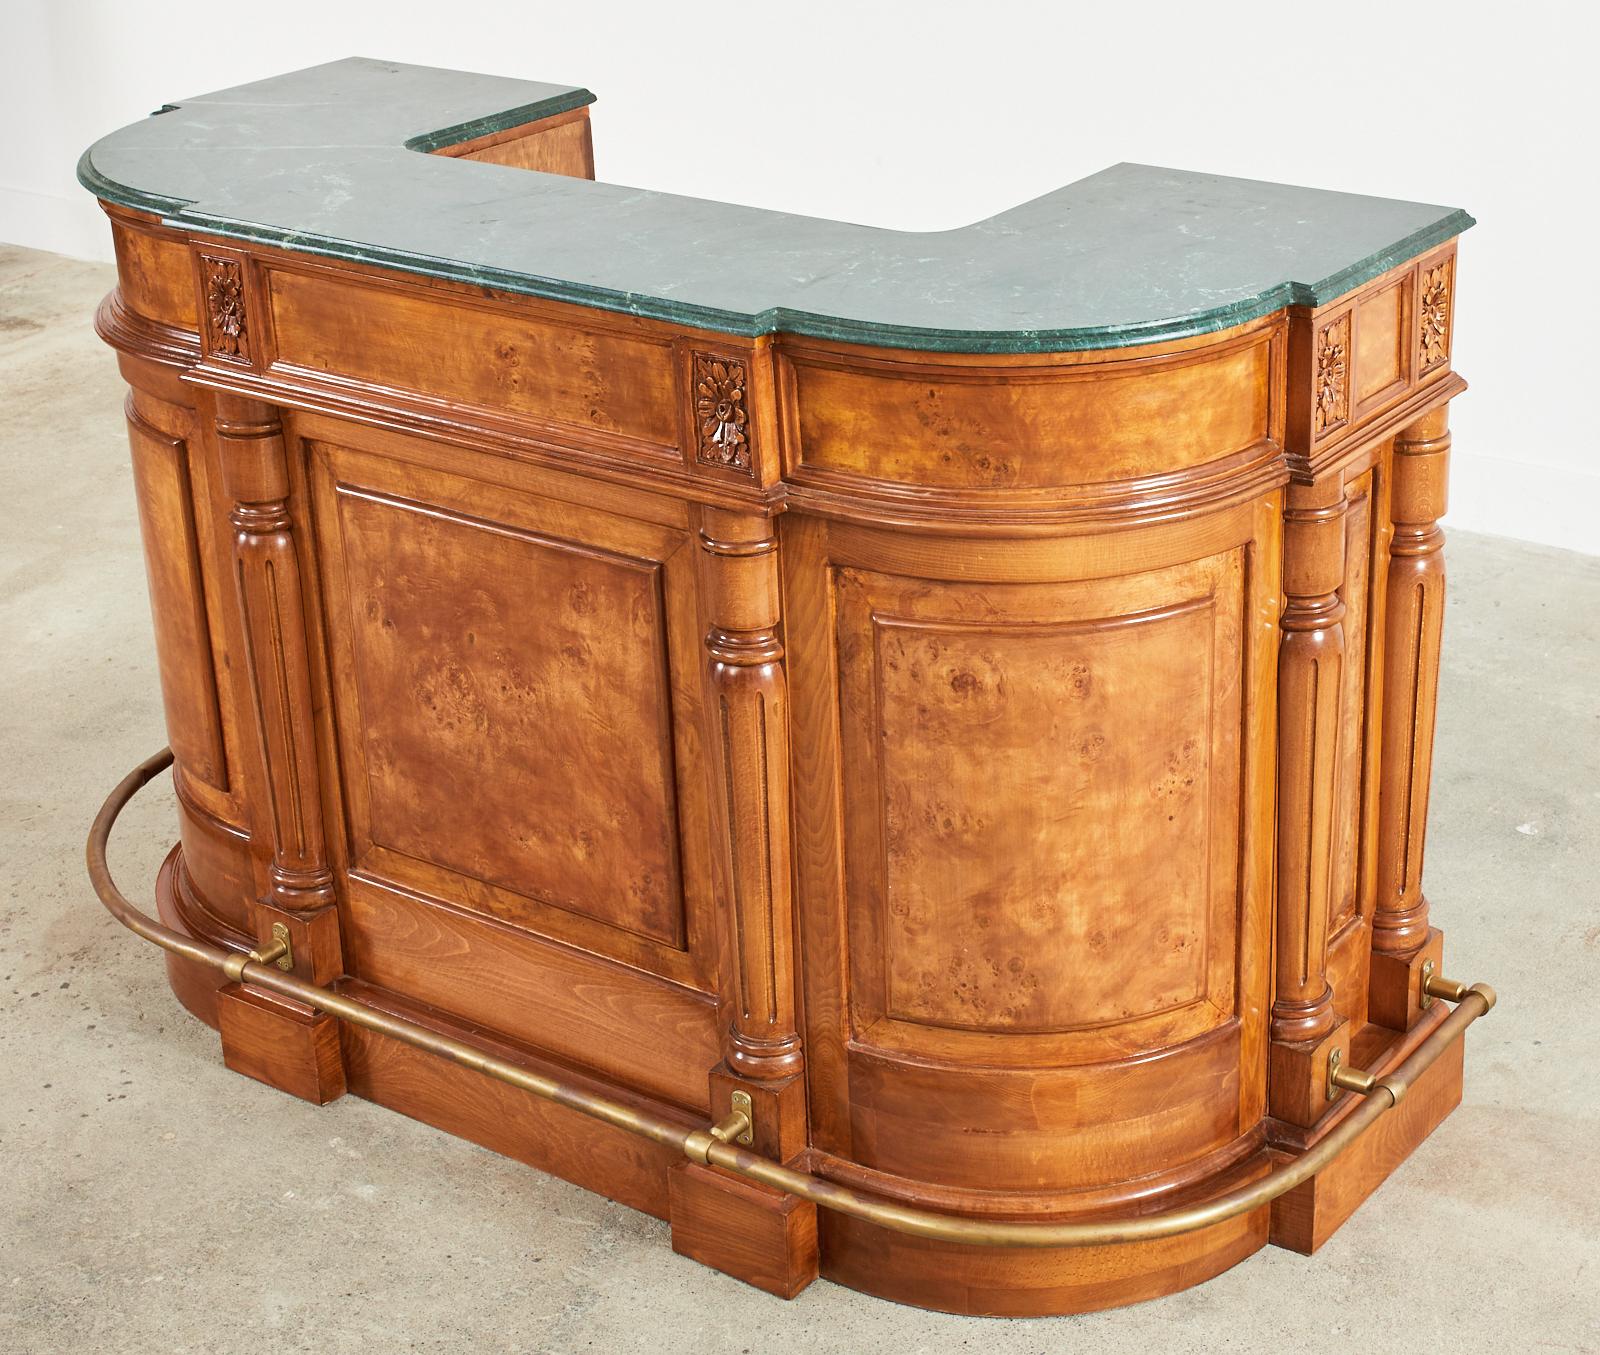 Opulent English carved dry bar featuring two conforming dark green marble tops. The large case is constructed from walnut, mahogany, and radiant burlwood veneer inlay having a demi-lune form. Crafted with pilaster columns and carved rosettes in the